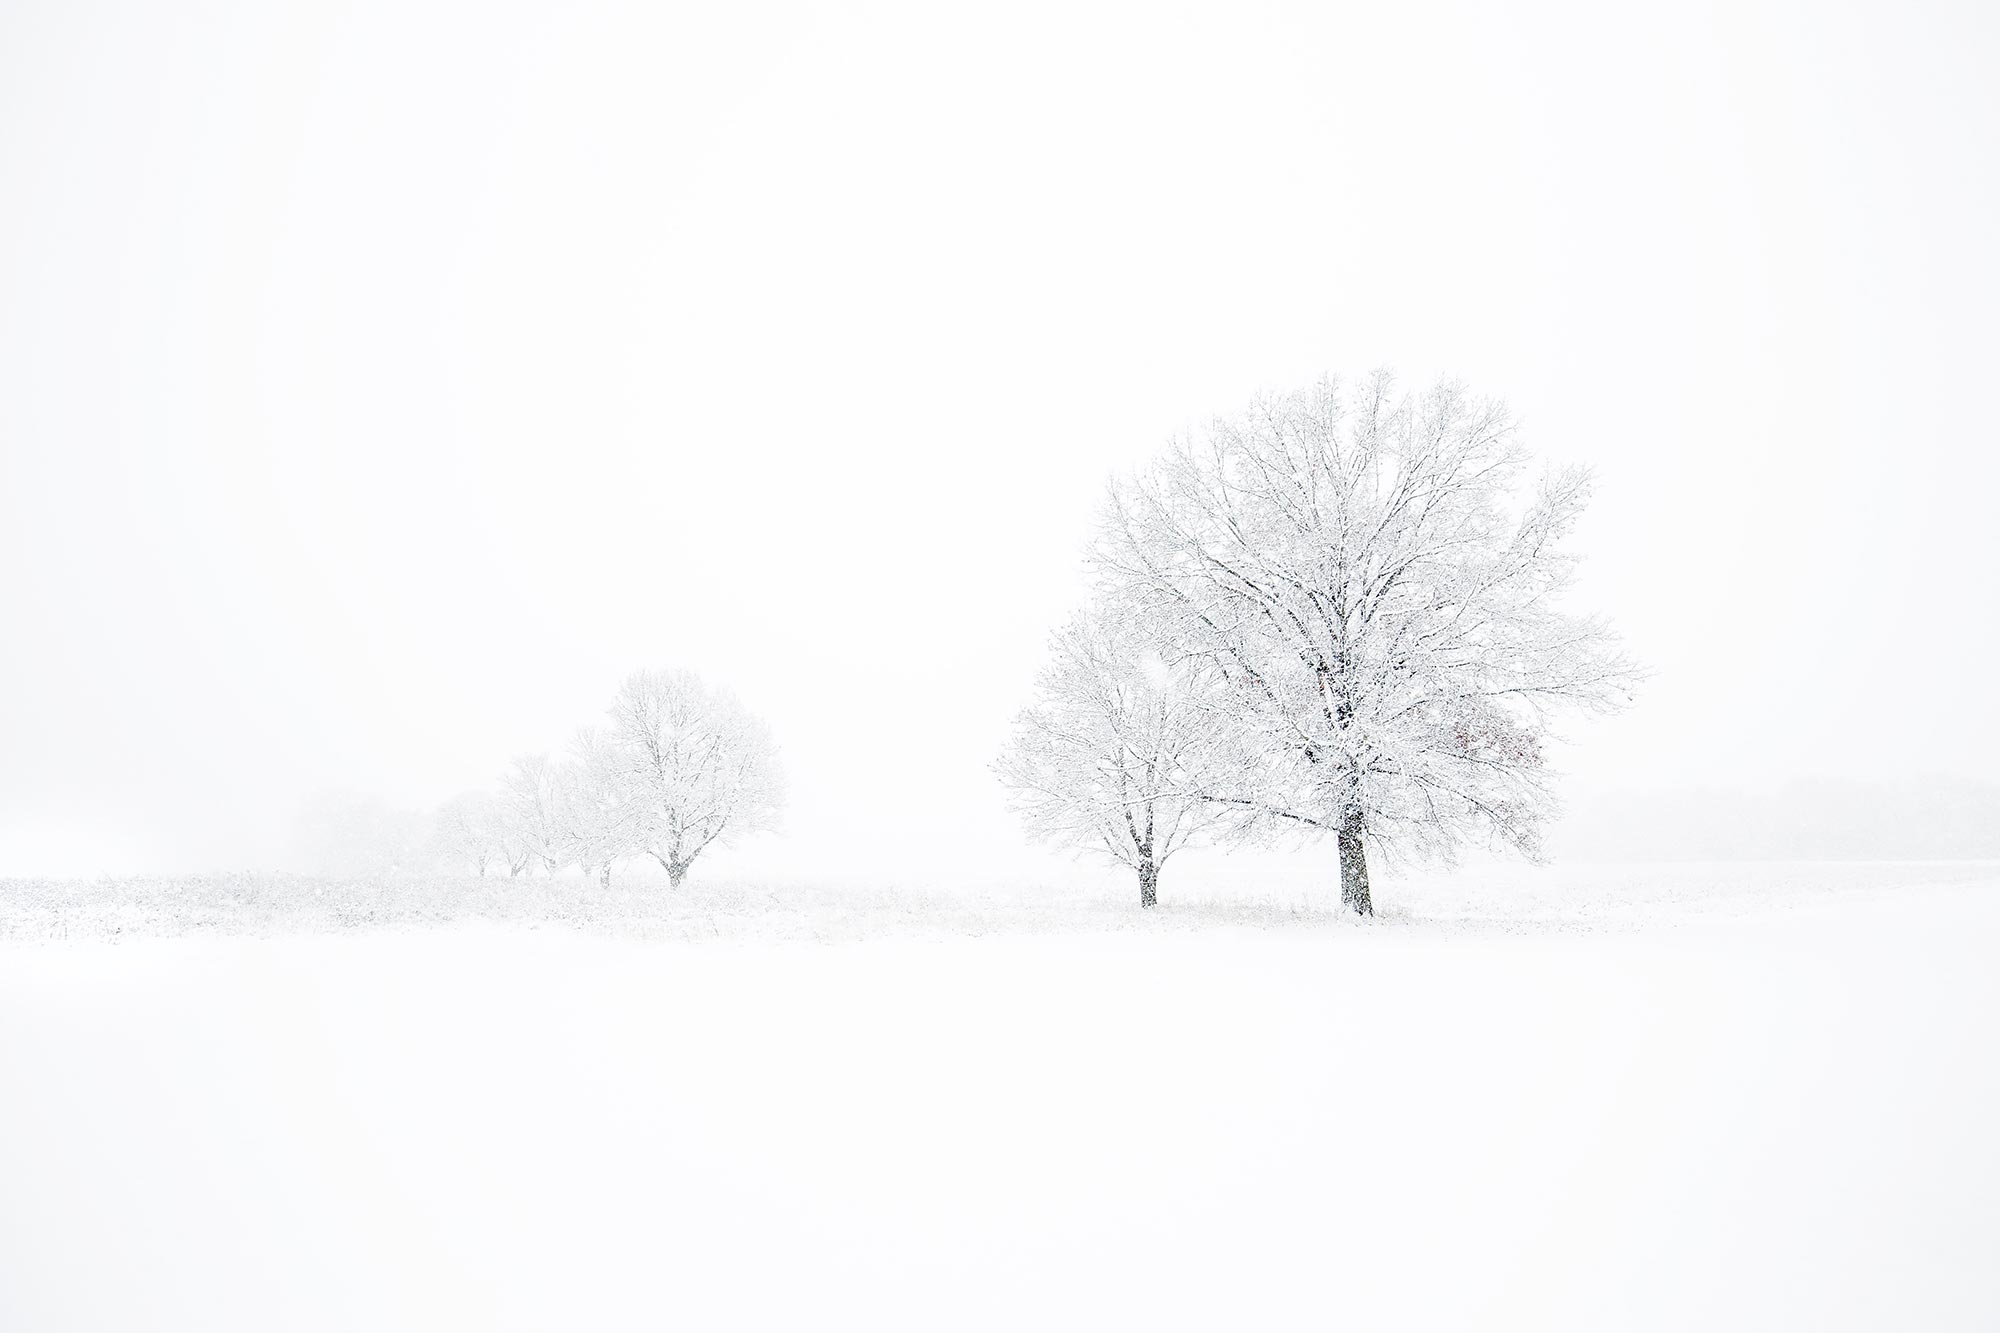 Trees in heavy snow at Leroy Oaks, St Charles, IL